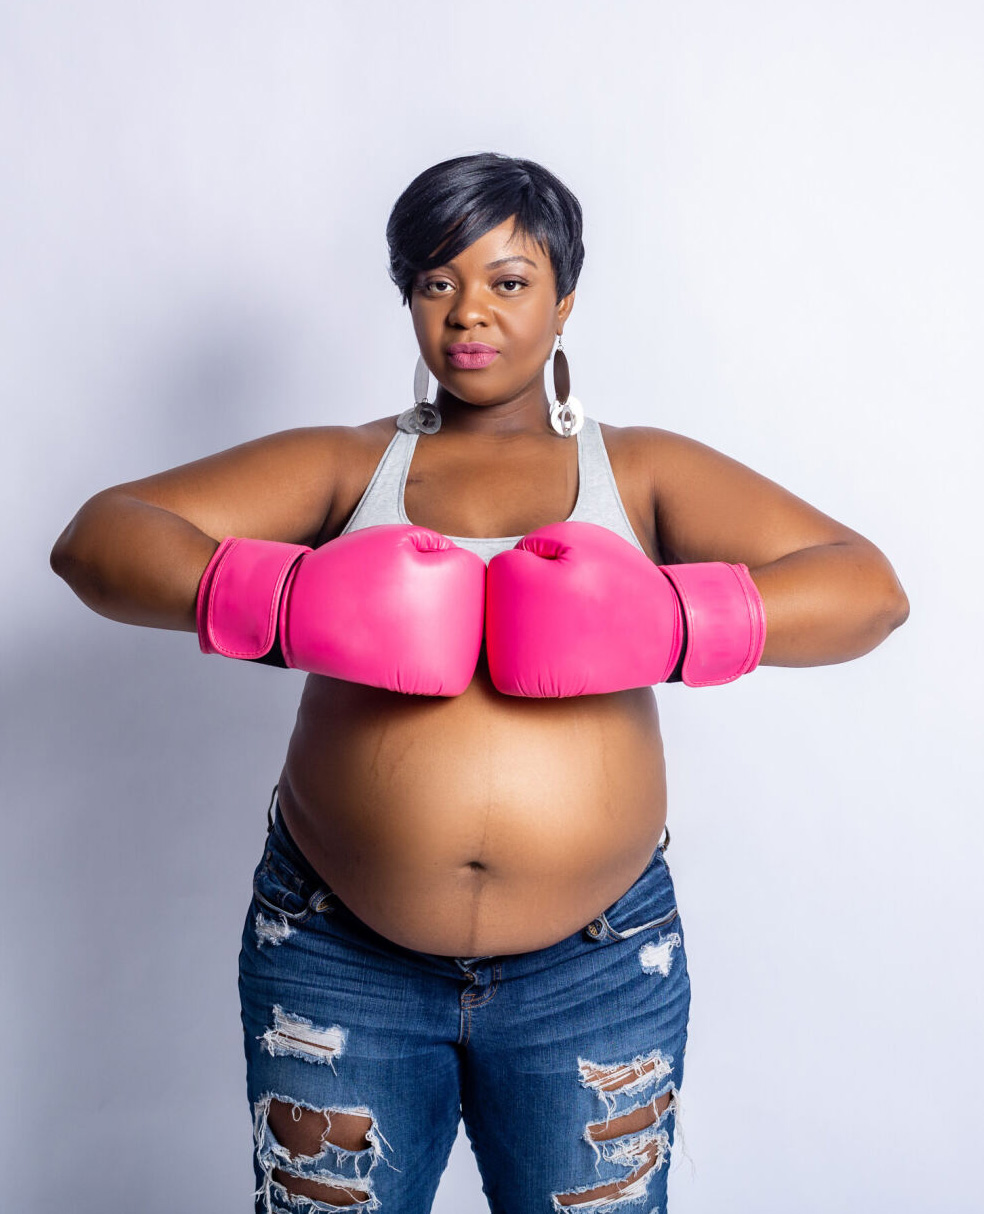 Jonise Louis poses with pink boxing gloves over her pregnant stomach